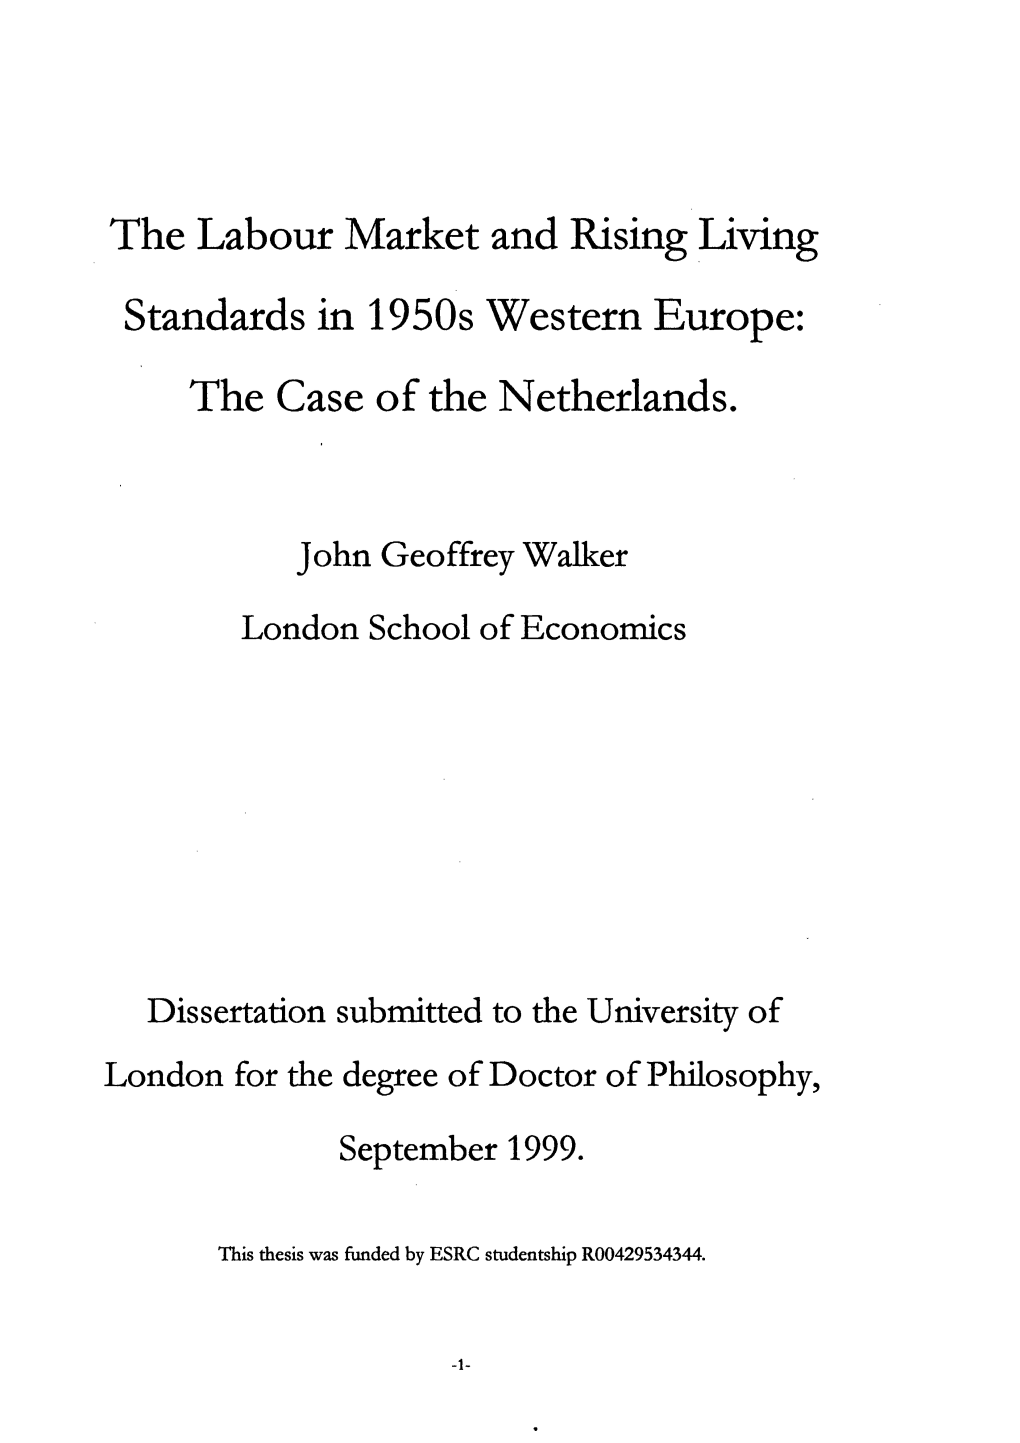 The Labour Market and Rising Living Standards in 1950S Western Europe: the Case of the Netherlands